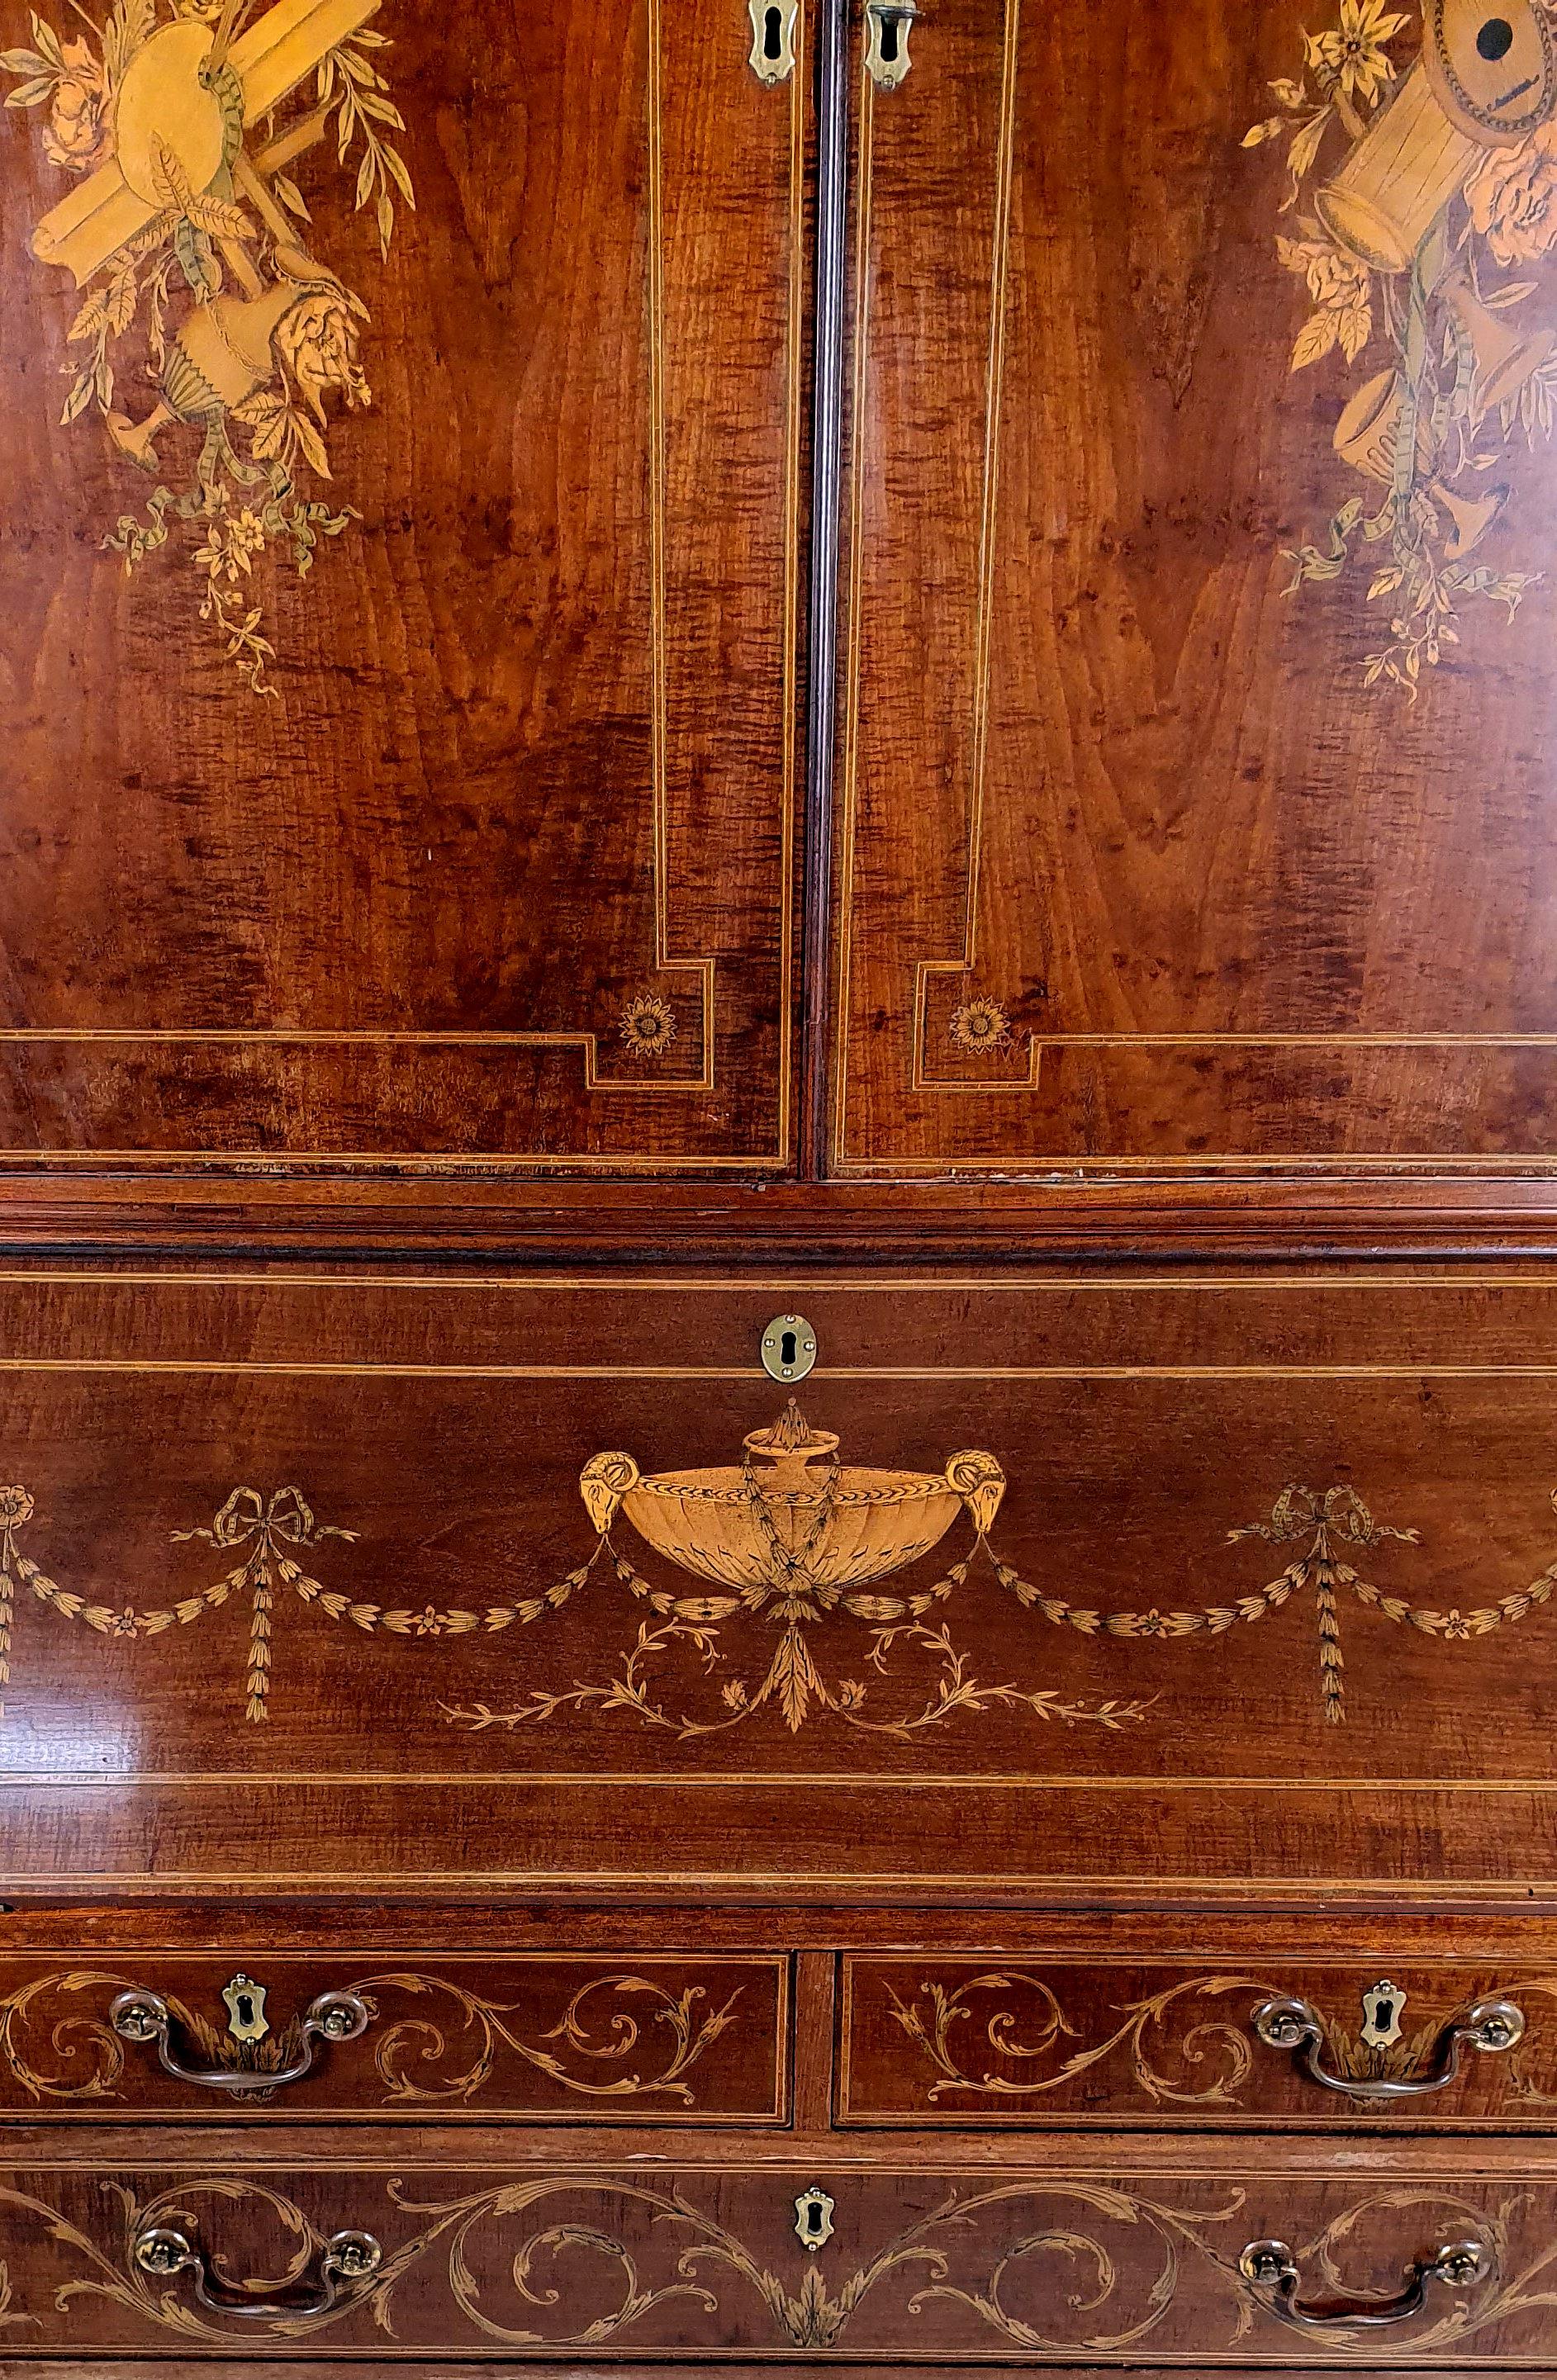 This superb and ornately detailed George III mahogany bureau bookcase is decorated with swags, musical instruments and rams heads inlaid with satinwood. The top section has 3 fully adjustable shelves with a central drop down writing desk top